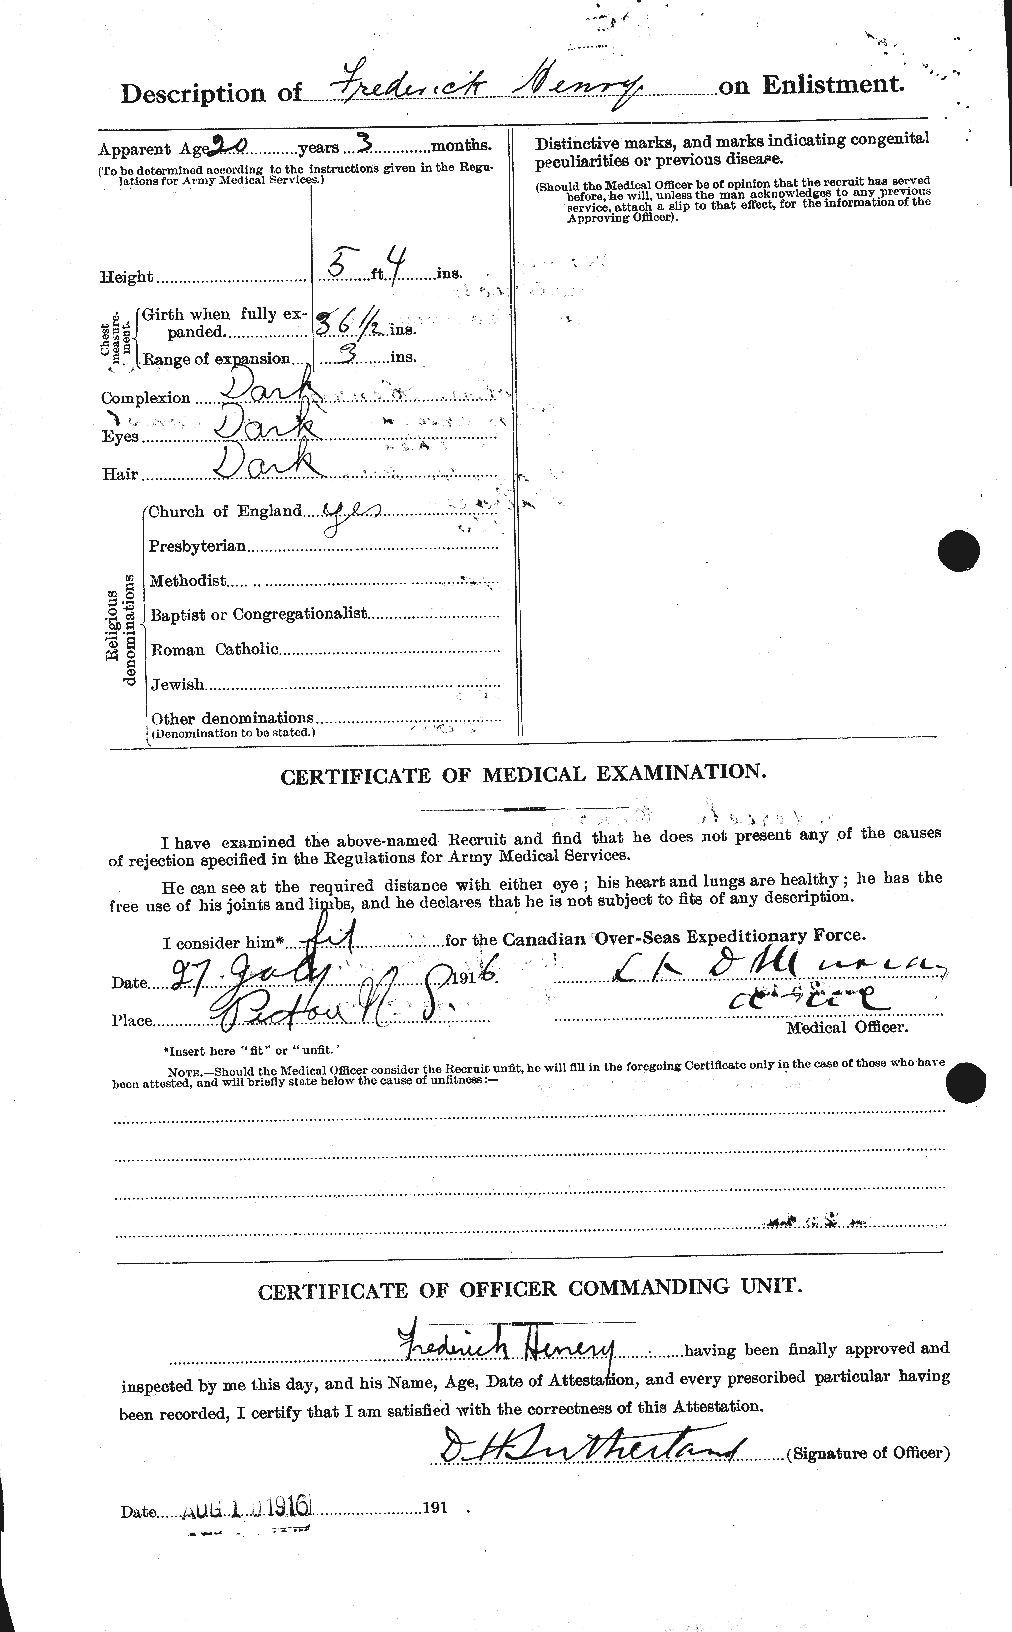 Personnel Records of the First World War - CEF 392858b